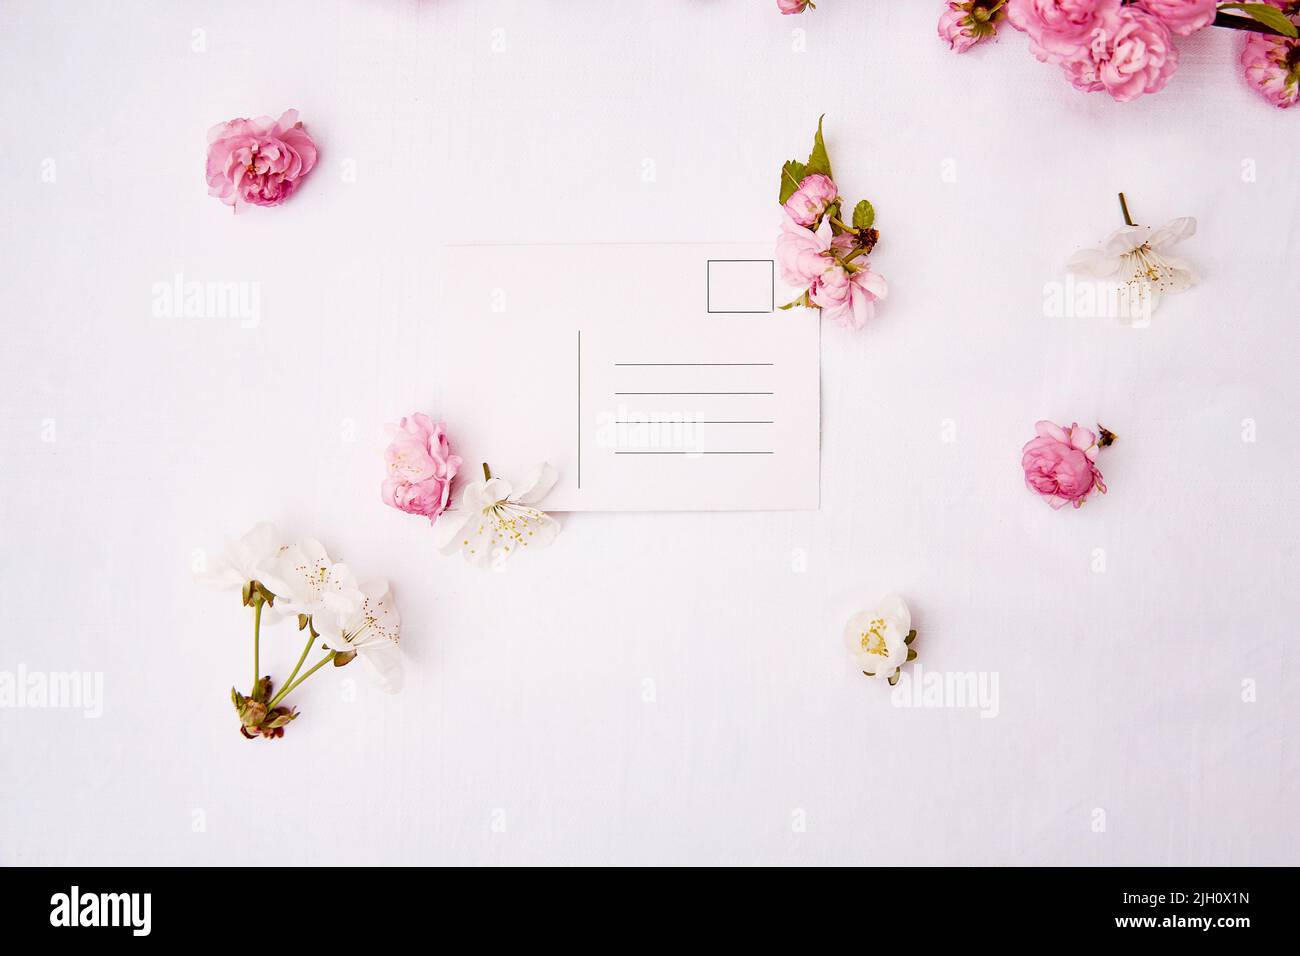 Spring delicate post card mock up with pink and white flowers. Woman's day, invitation, romantic, wedding, birthday, Mother's day card concept. Copy space. View from above. Stock Photo